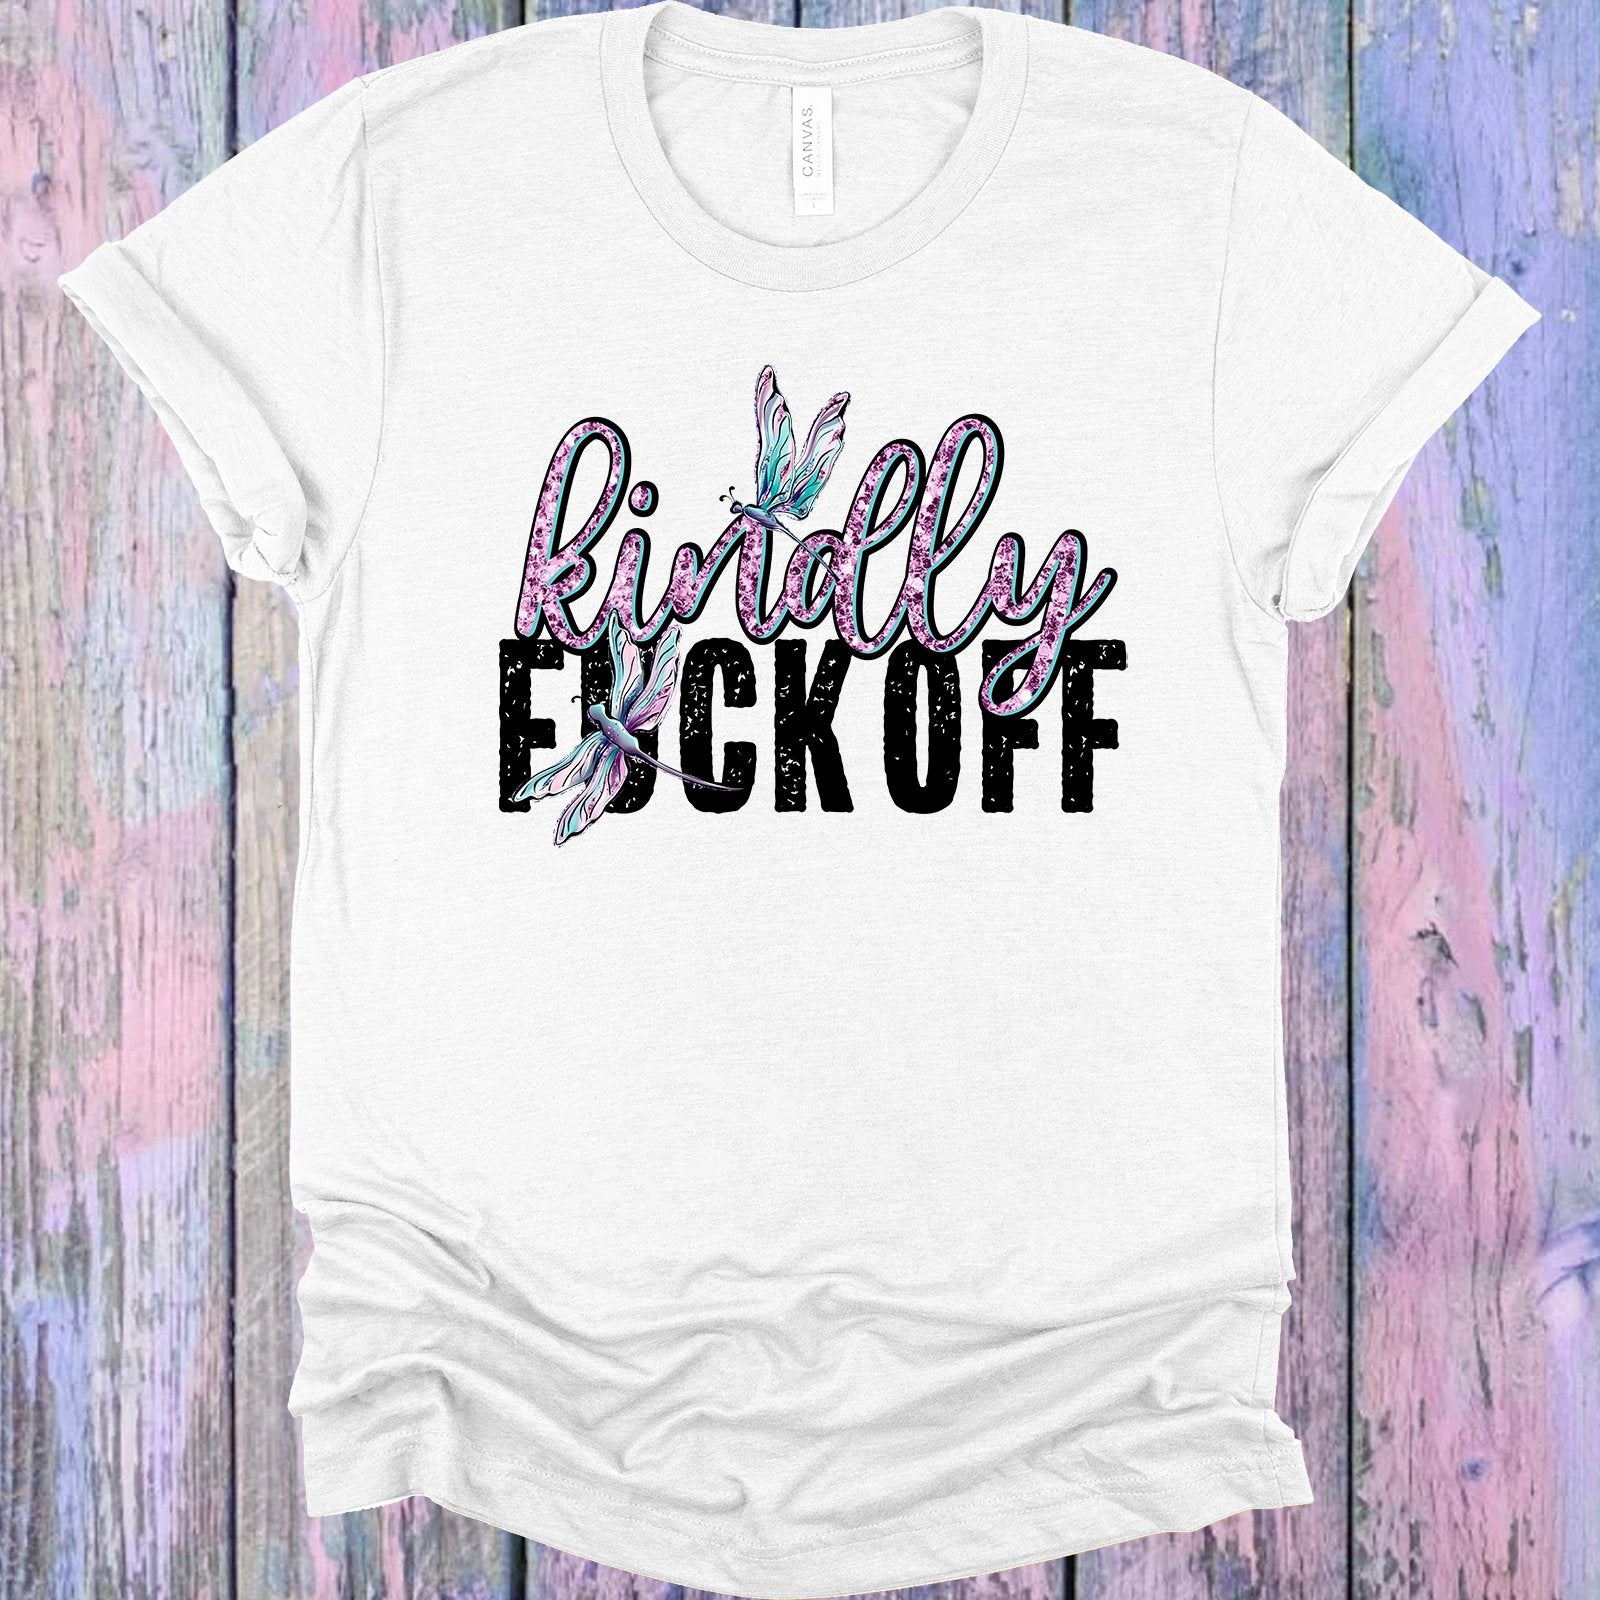 Kindly F*ck Off Graphic Tee Graphic Tee